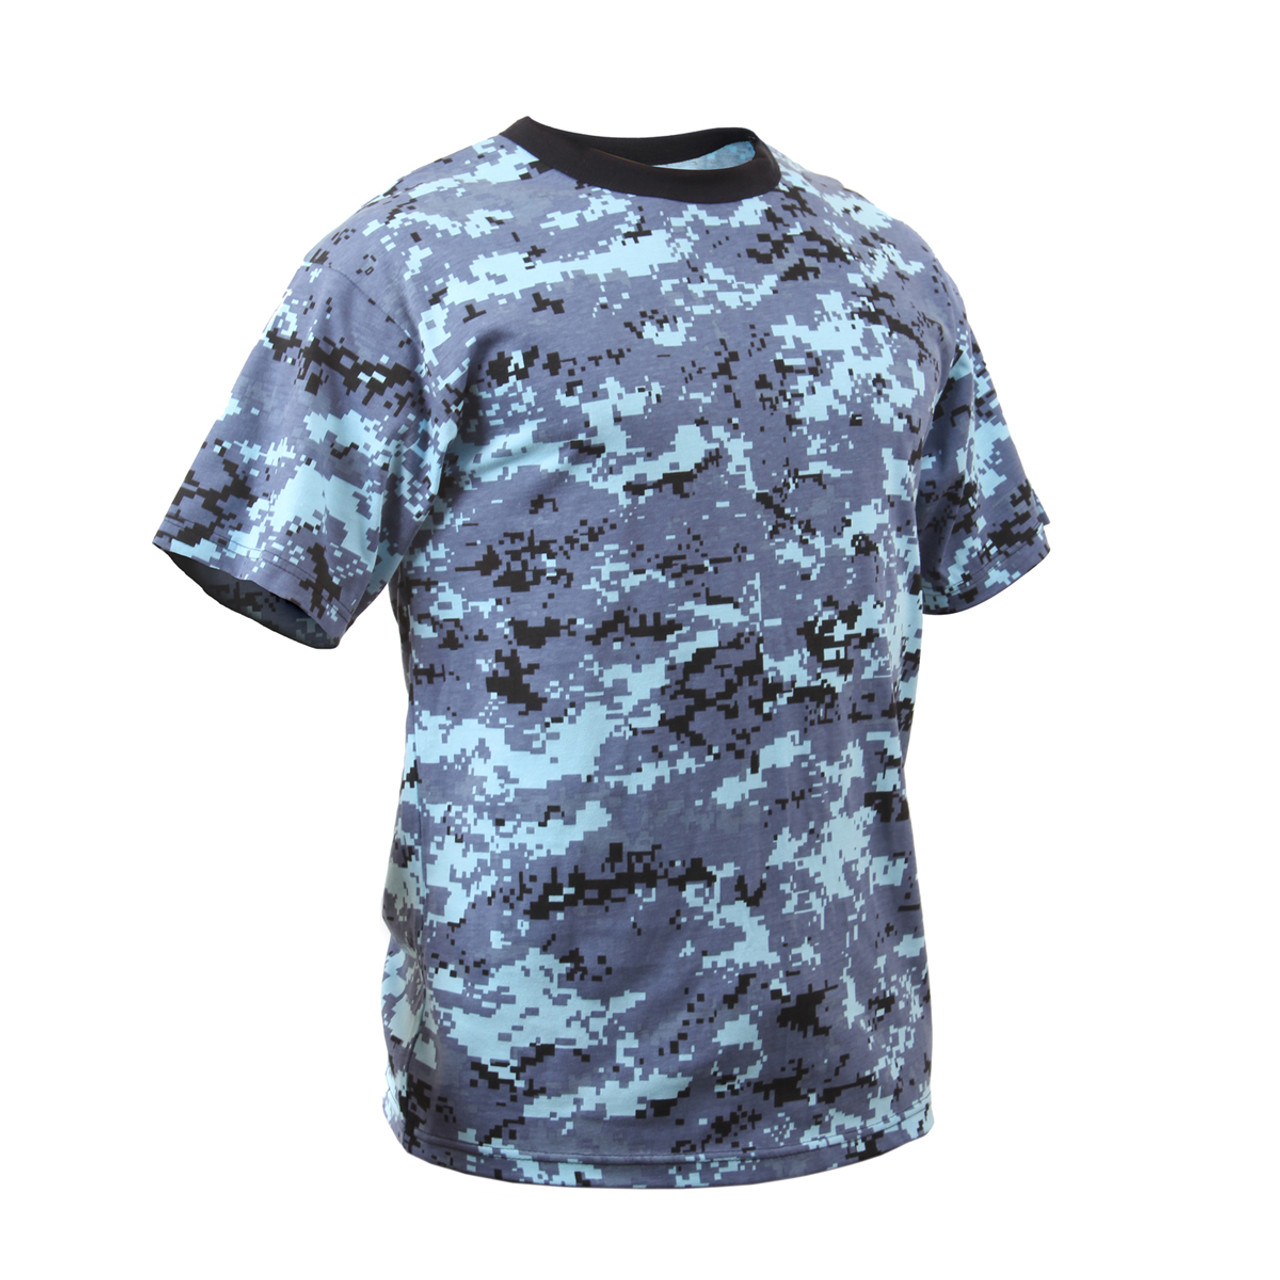 Sky Blue Digital Camouflage Short Sleeve T-Shirt with ARMY UNIVERSE Pin -  Size Small (33-37) 